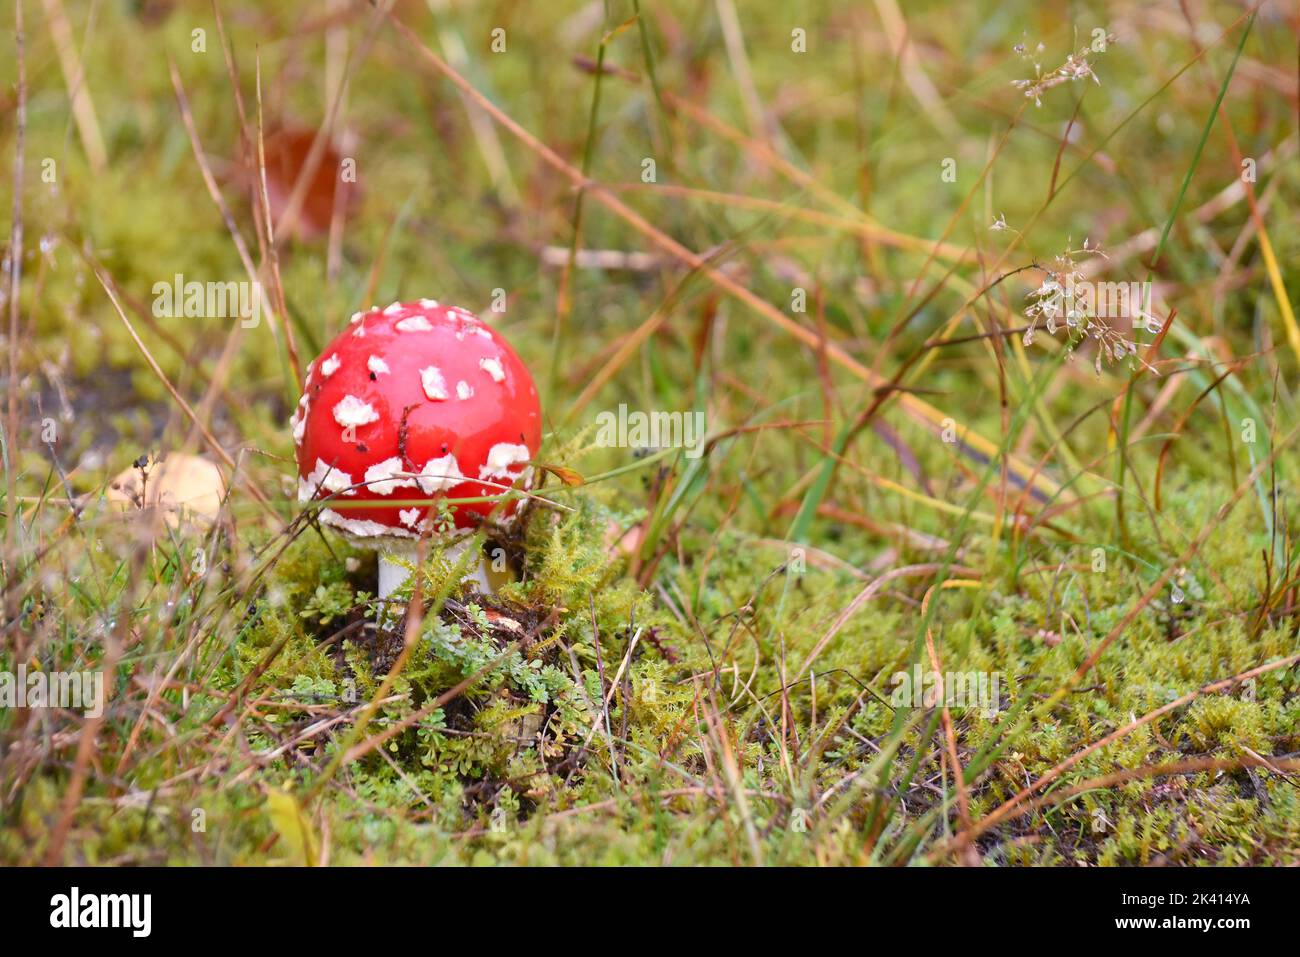 stand alone picture of a fly mushroom Amanita muscaria on green gras in the nature of germany Stock Photo